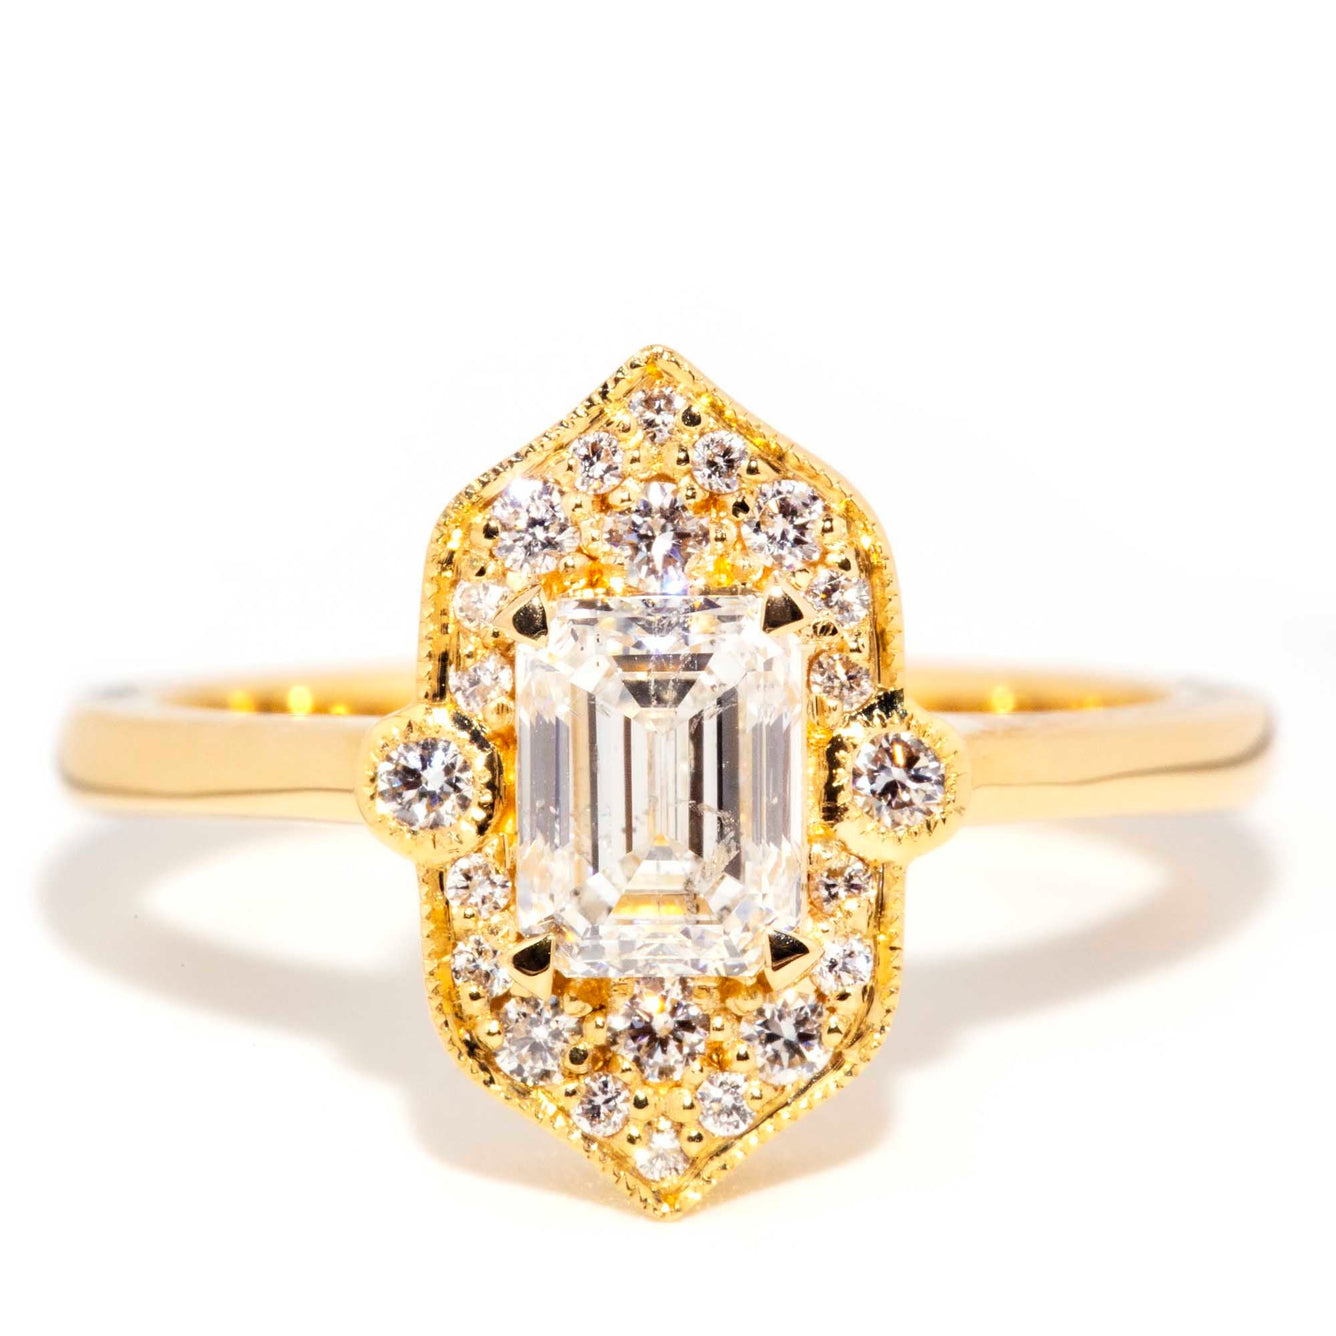 Juno 18ct Yellow Gold Emerald Cut Diamond Cluster Ring* OB Gemmo $ Rings Imperial Jewellery Imperial Jewellery - Hamilton 